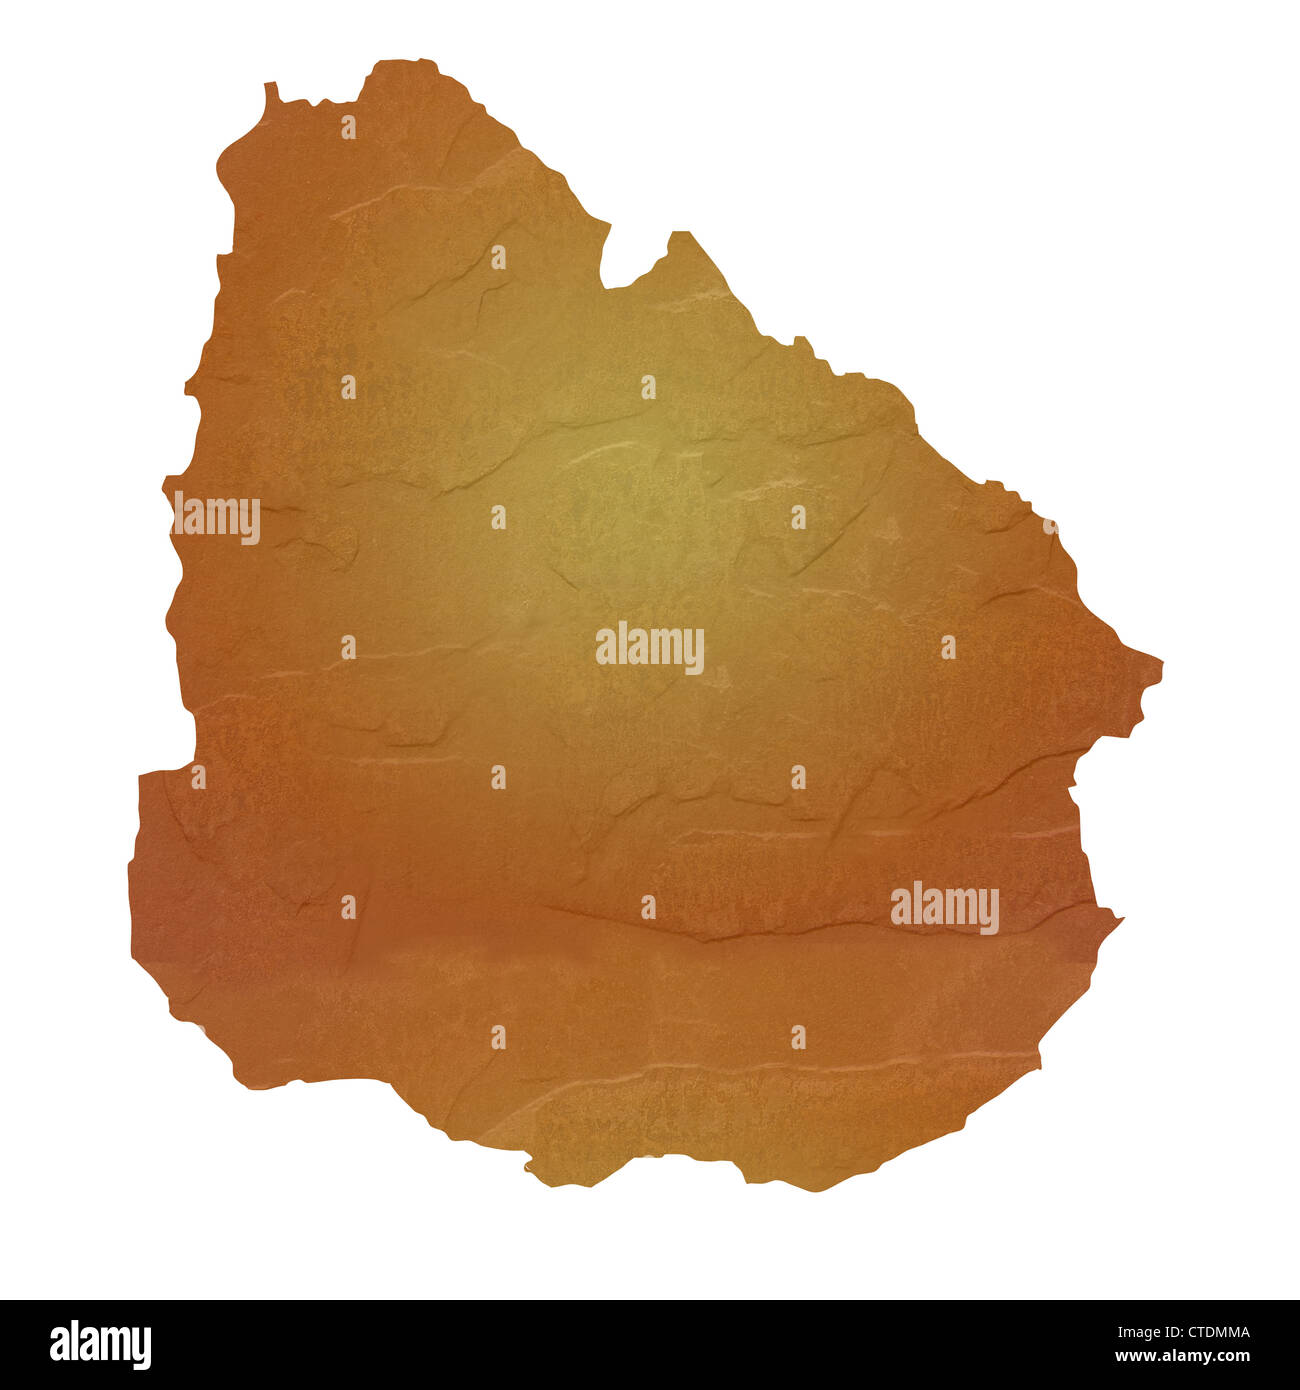 Textured map of Uruguay map with brown rock or stone texture, isolated on white background with clipping path. Stock Photo